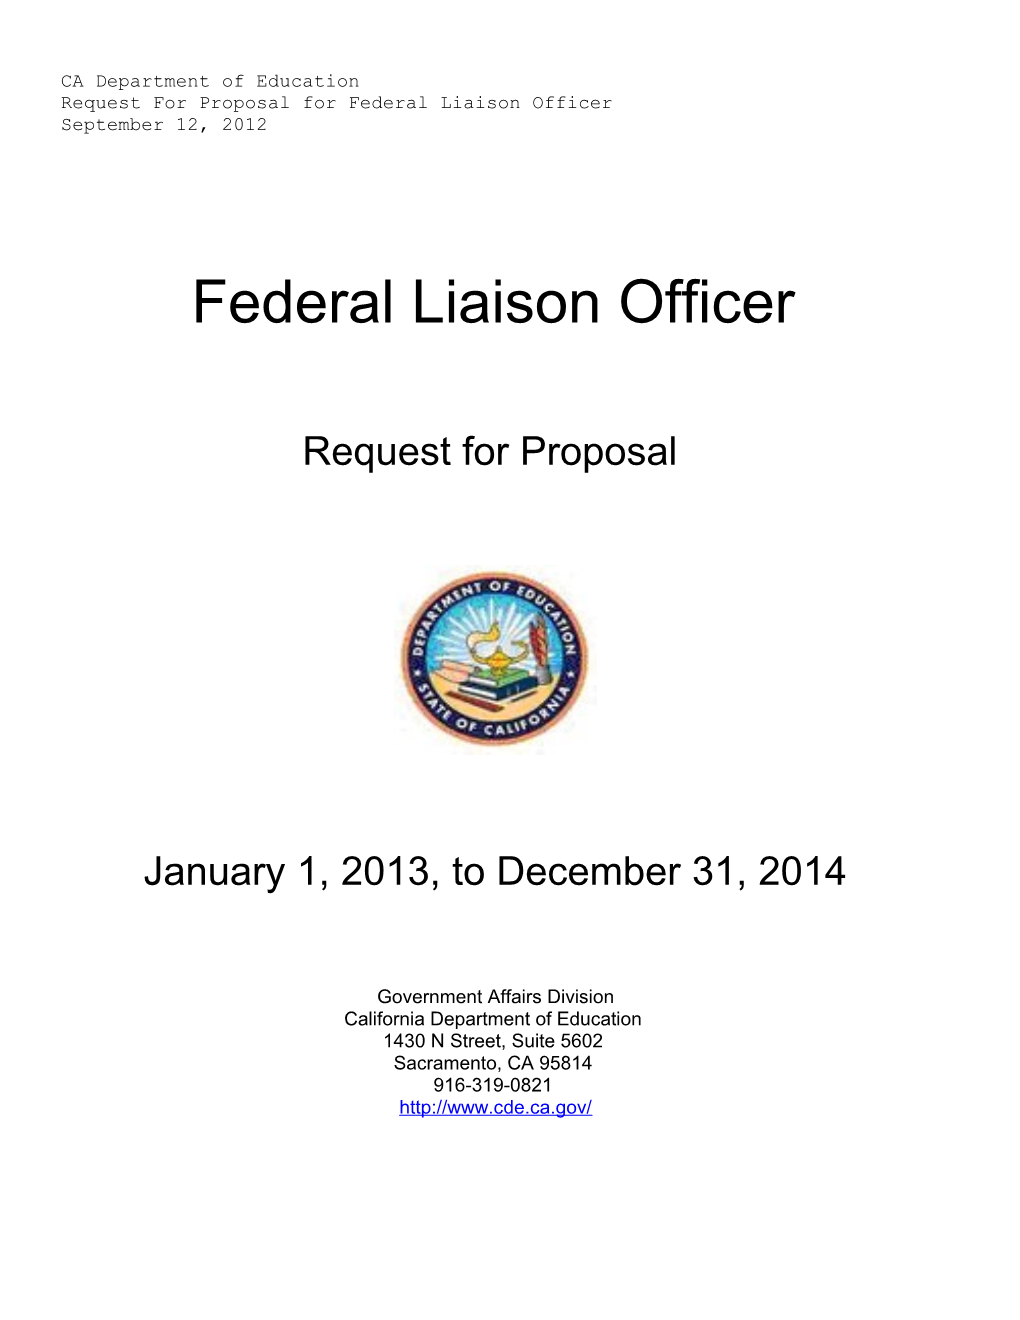 RFP-12: Federal Liaison Officer (CA Dept of Education)